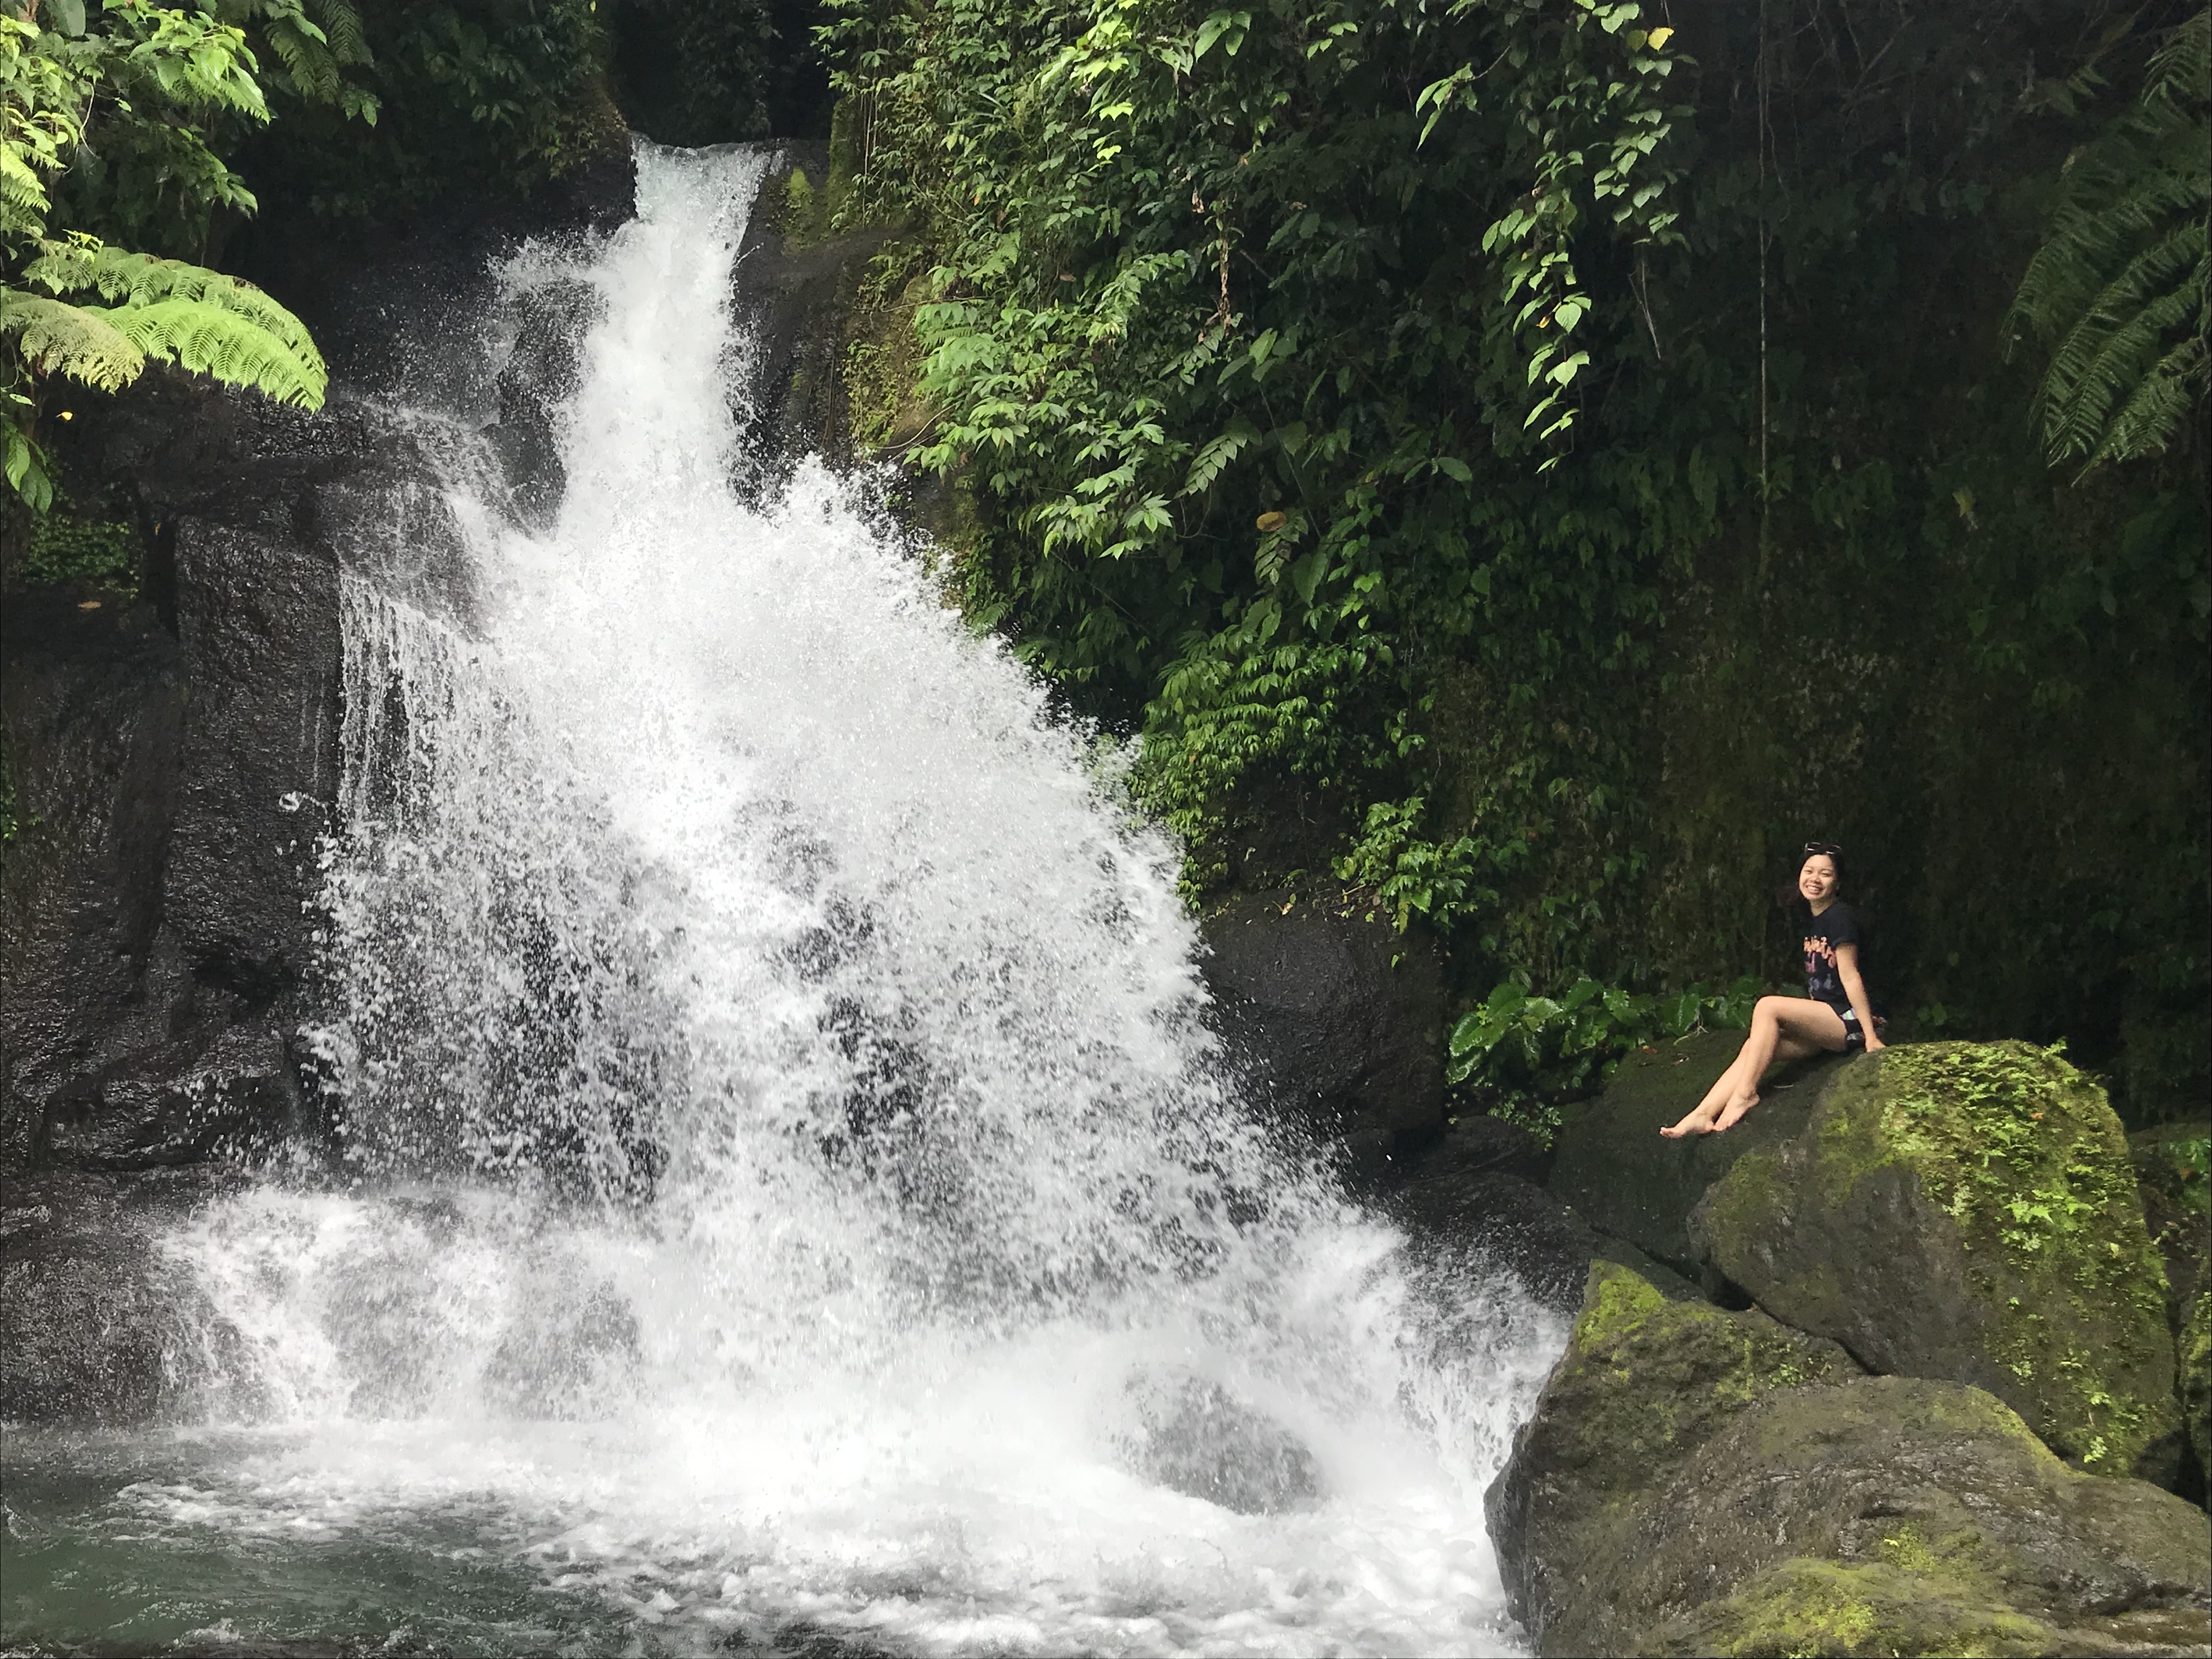 It’s Time to Explore the Beauty of Sorsogon, Philippines (Travel Blog Series Featuring Rochelle Enrera)